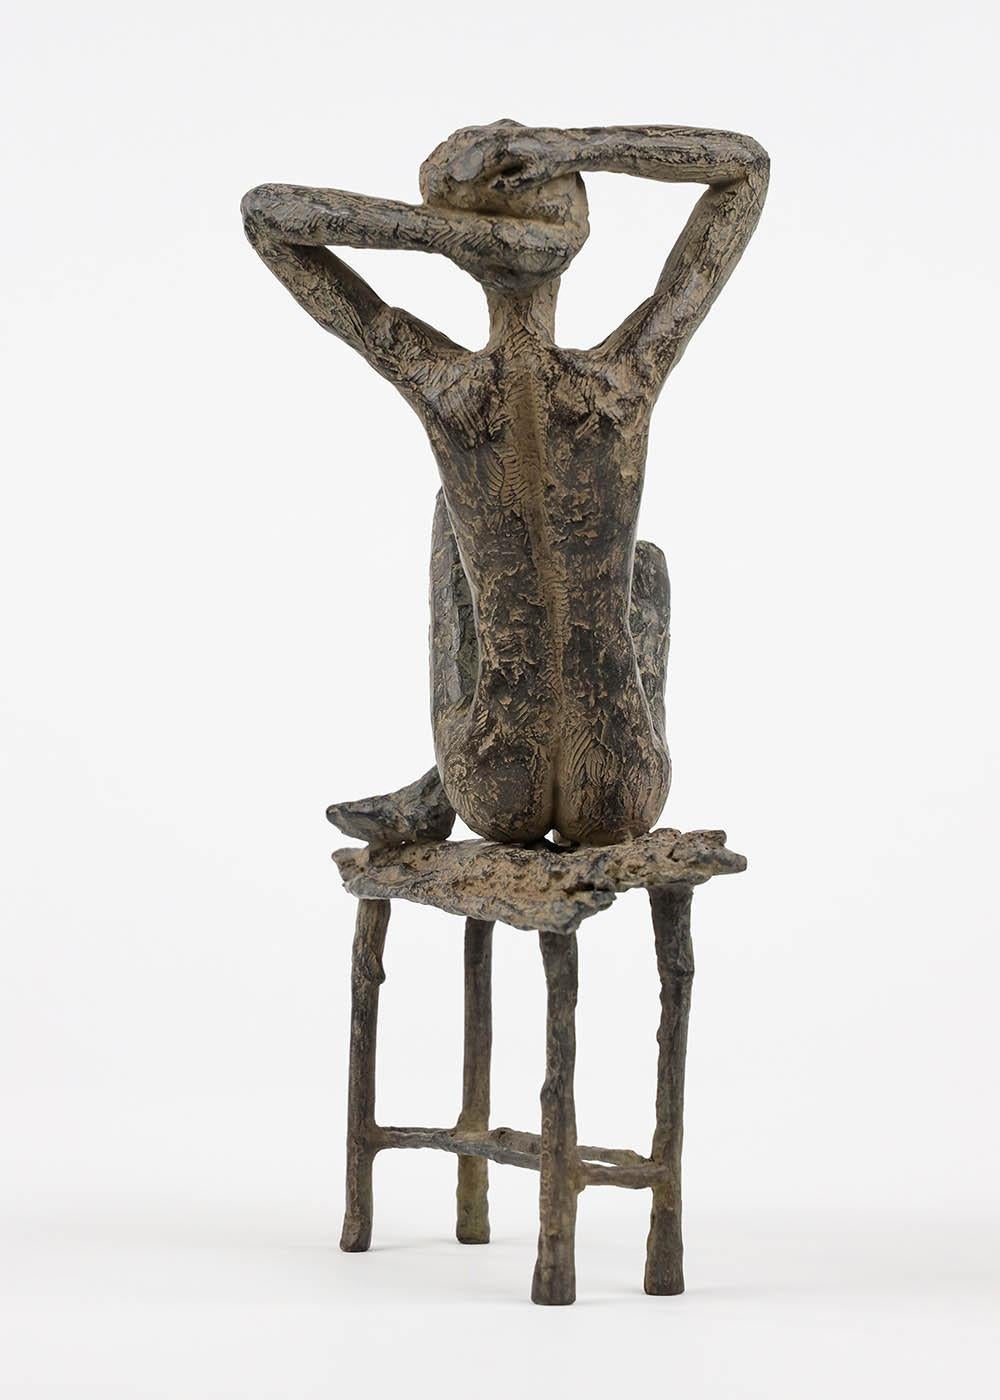 Enchanting Rituals by Marine de Soos - Seated Female Nude, bronze sculpture For Sale 2